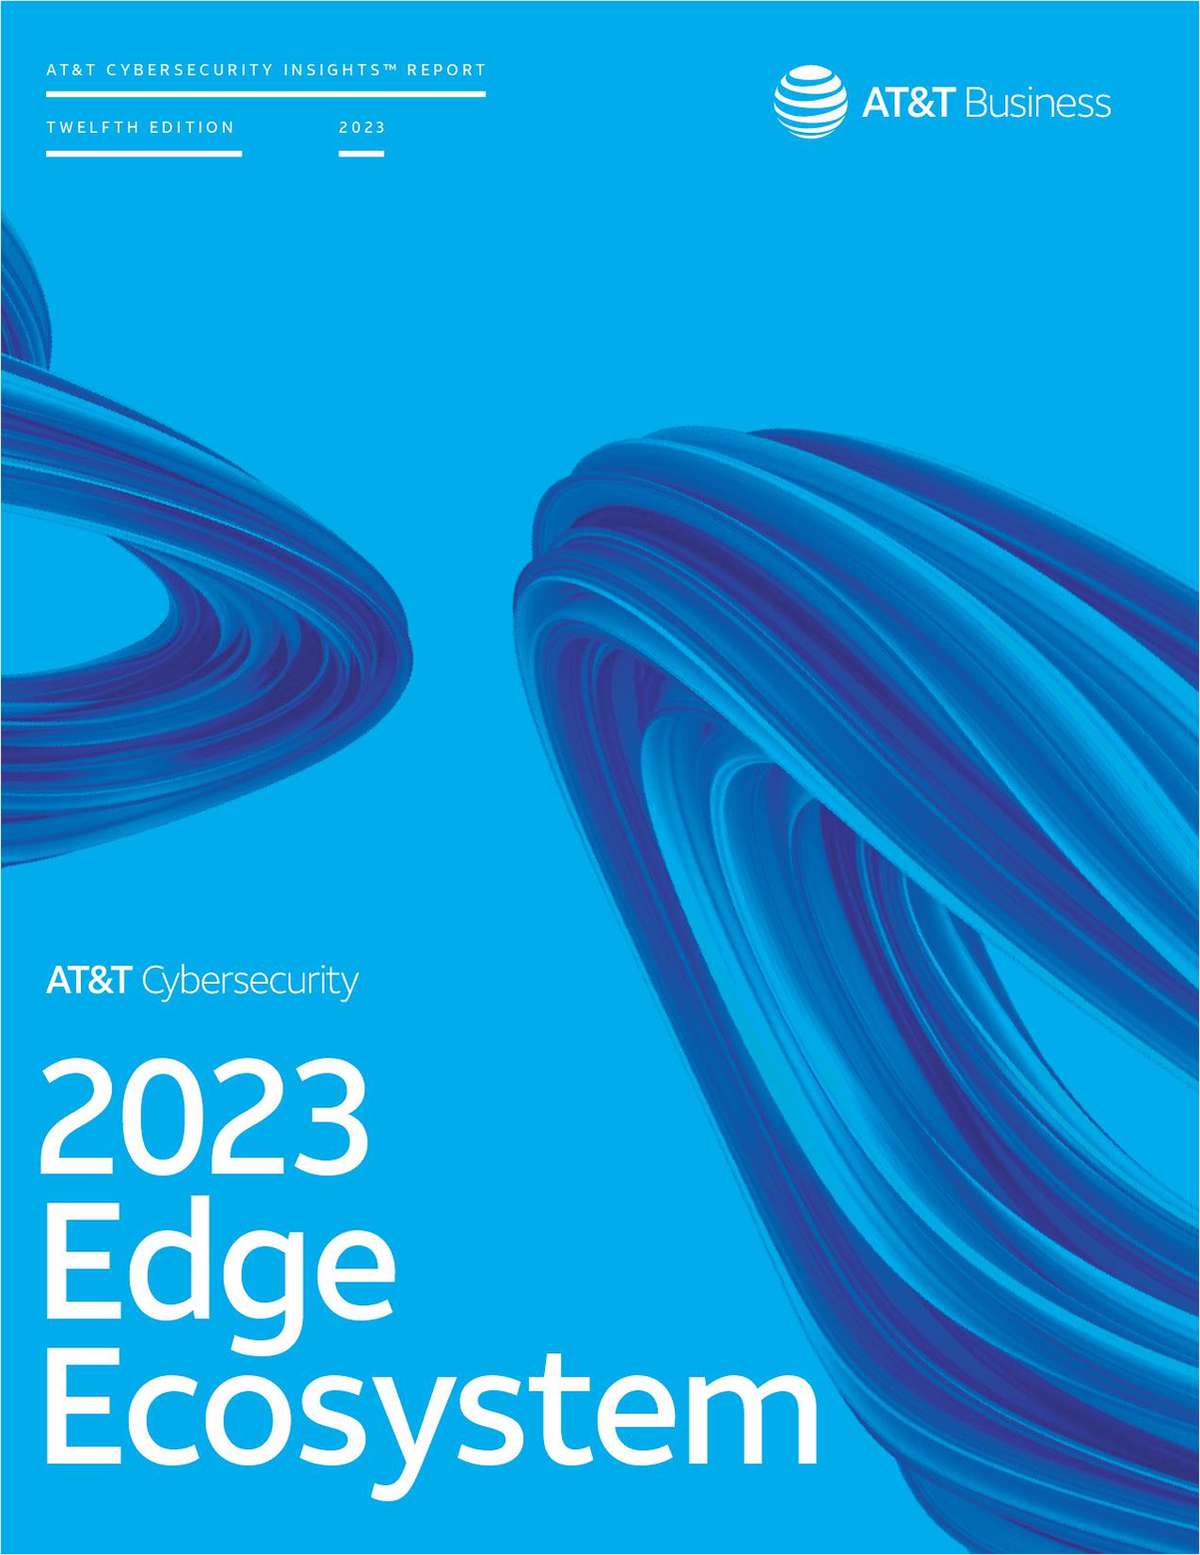 AT&T Cybersecurity Insights Report - Edge Ecosystem 2023